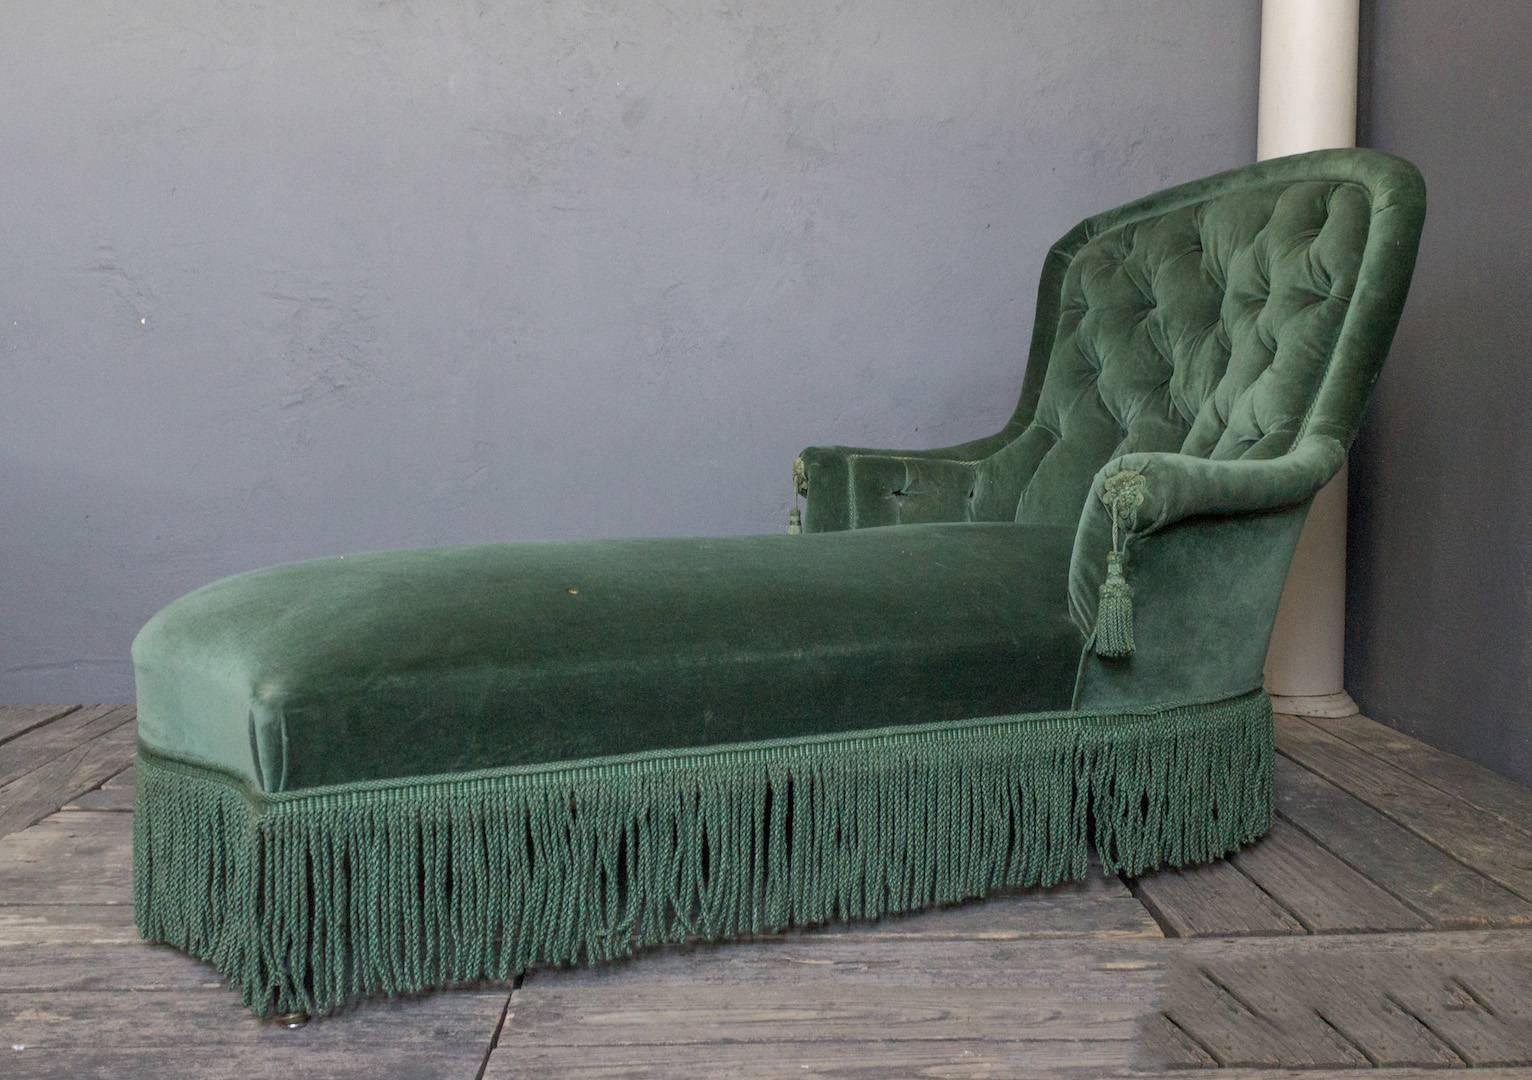 A stunning French 19th century Napoleon III tufted chaise lounge. Instantly add a breathtaking piece of French 19th century elegance to your home with this Napoleon III tufted chaise lounge in green velvet. Featuring a rounded back and decorative